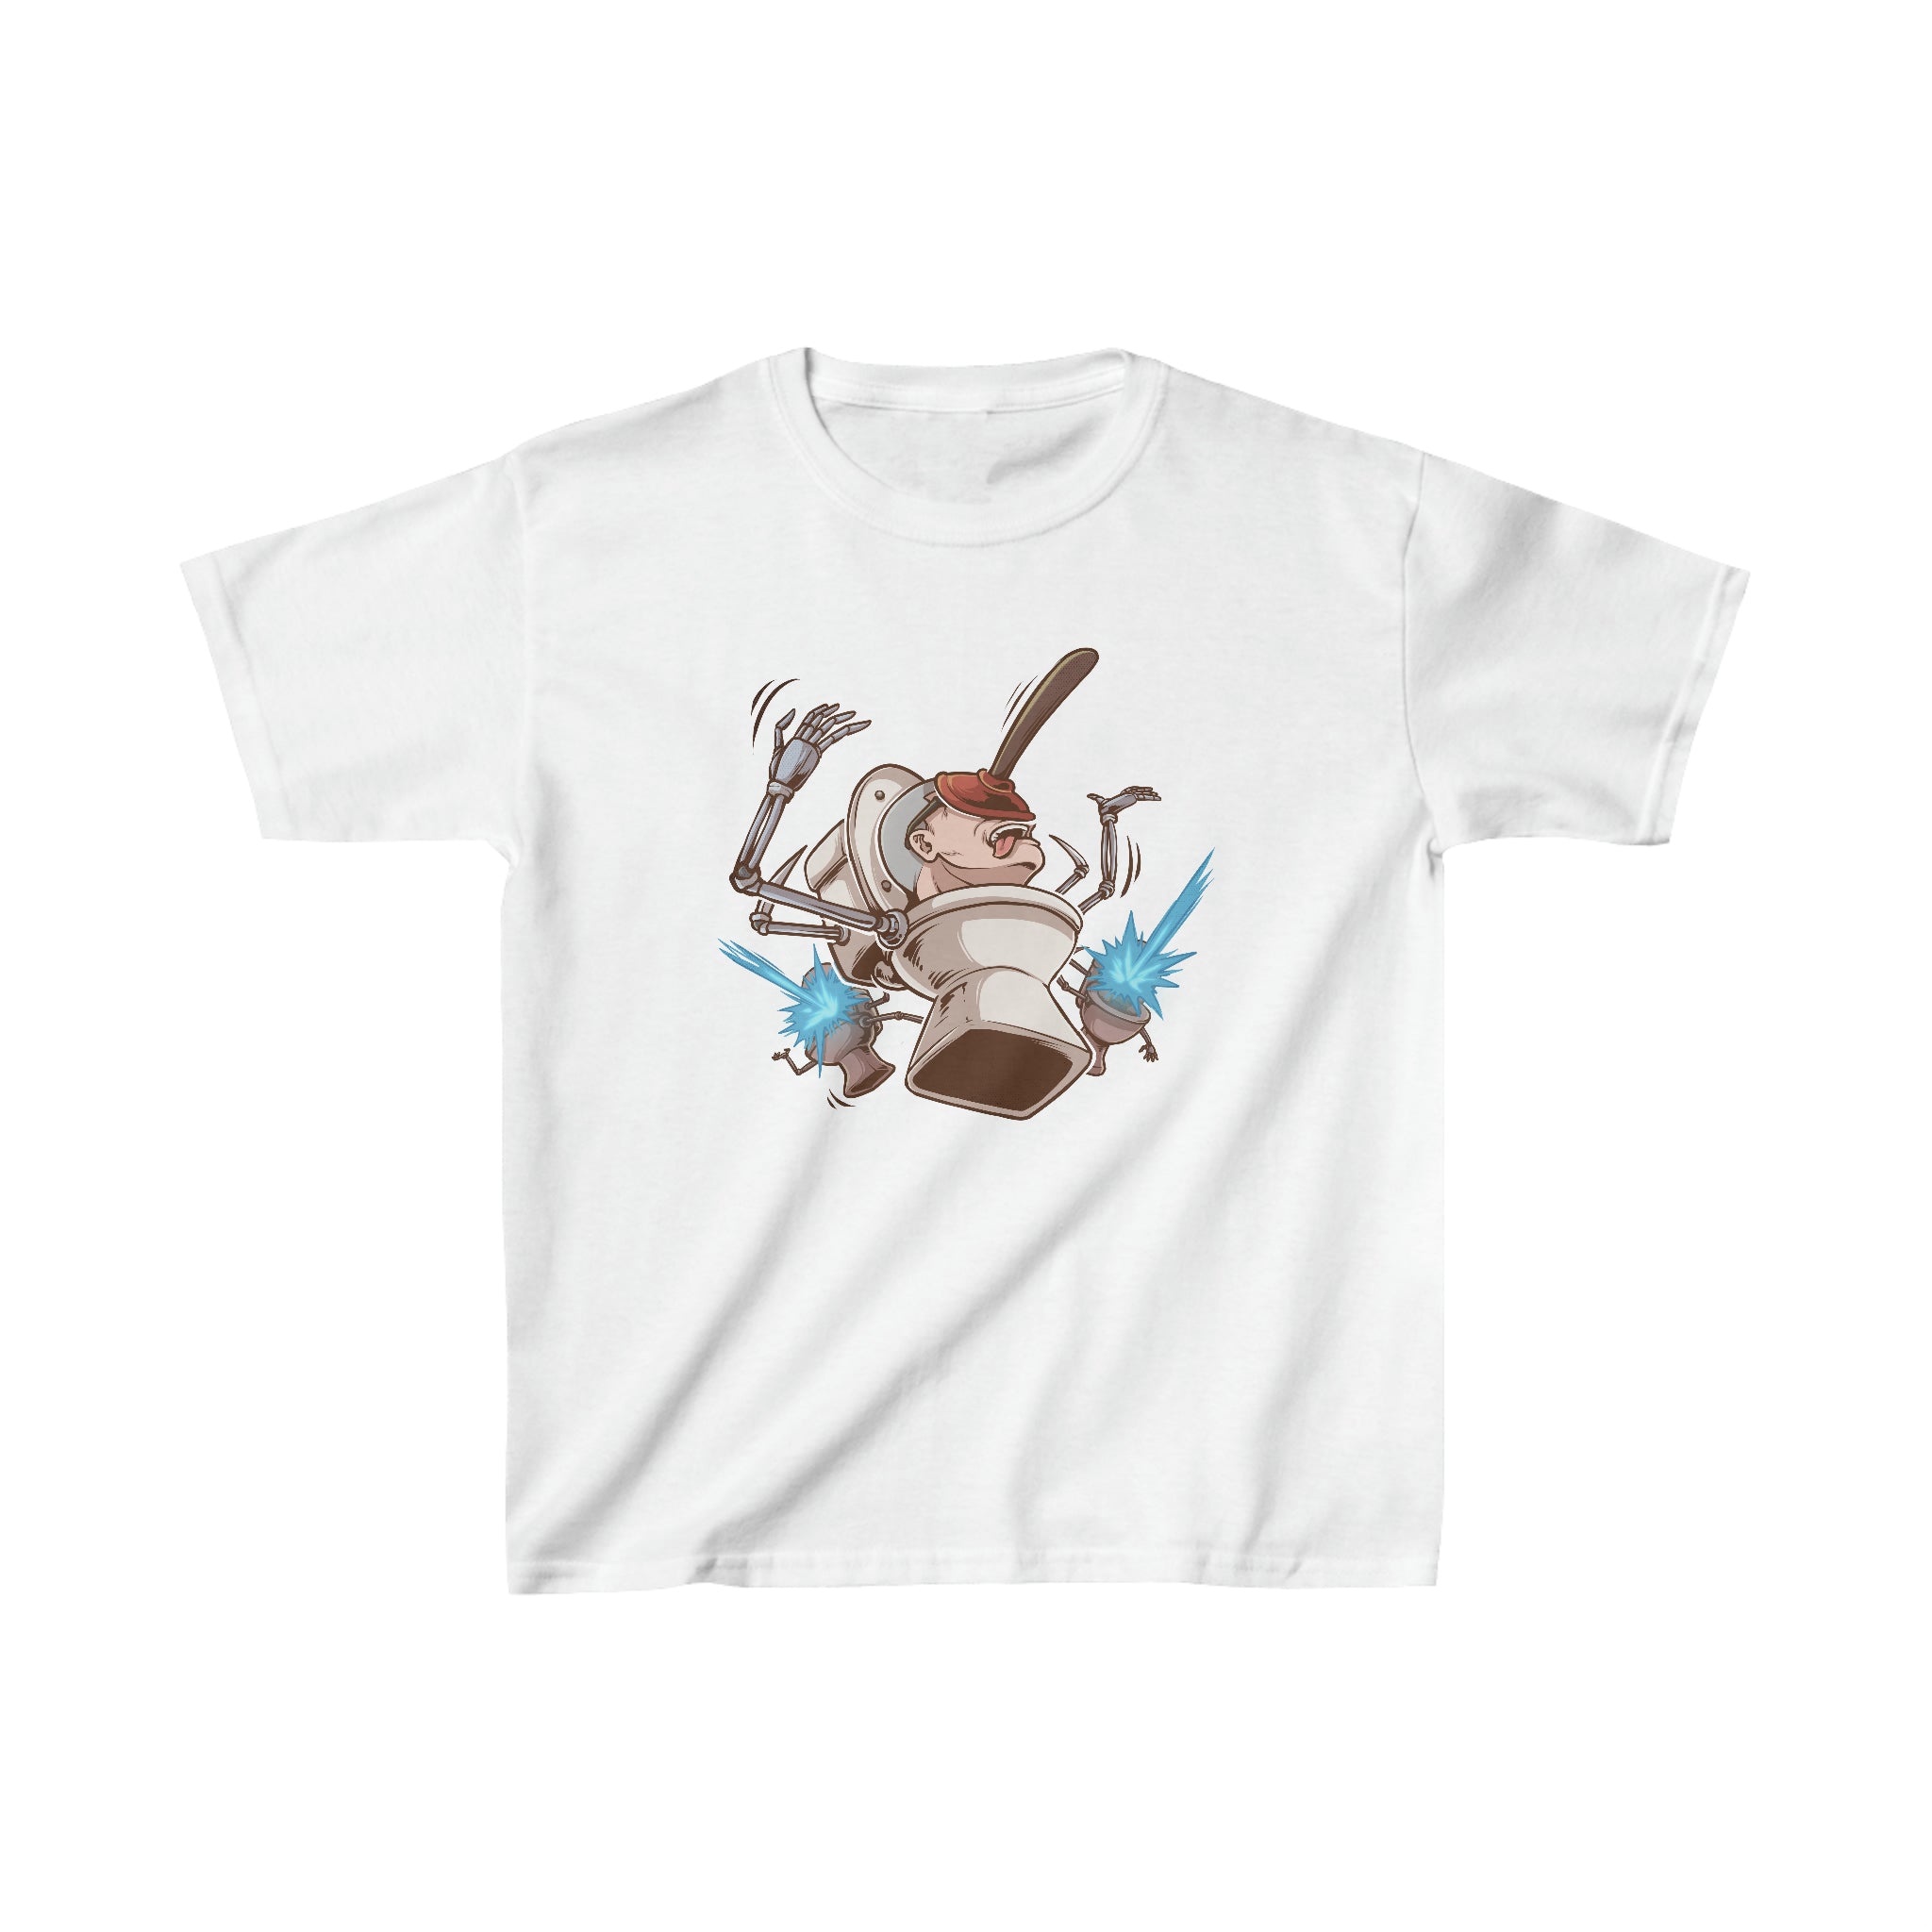 Plunger Face Tee - Youth